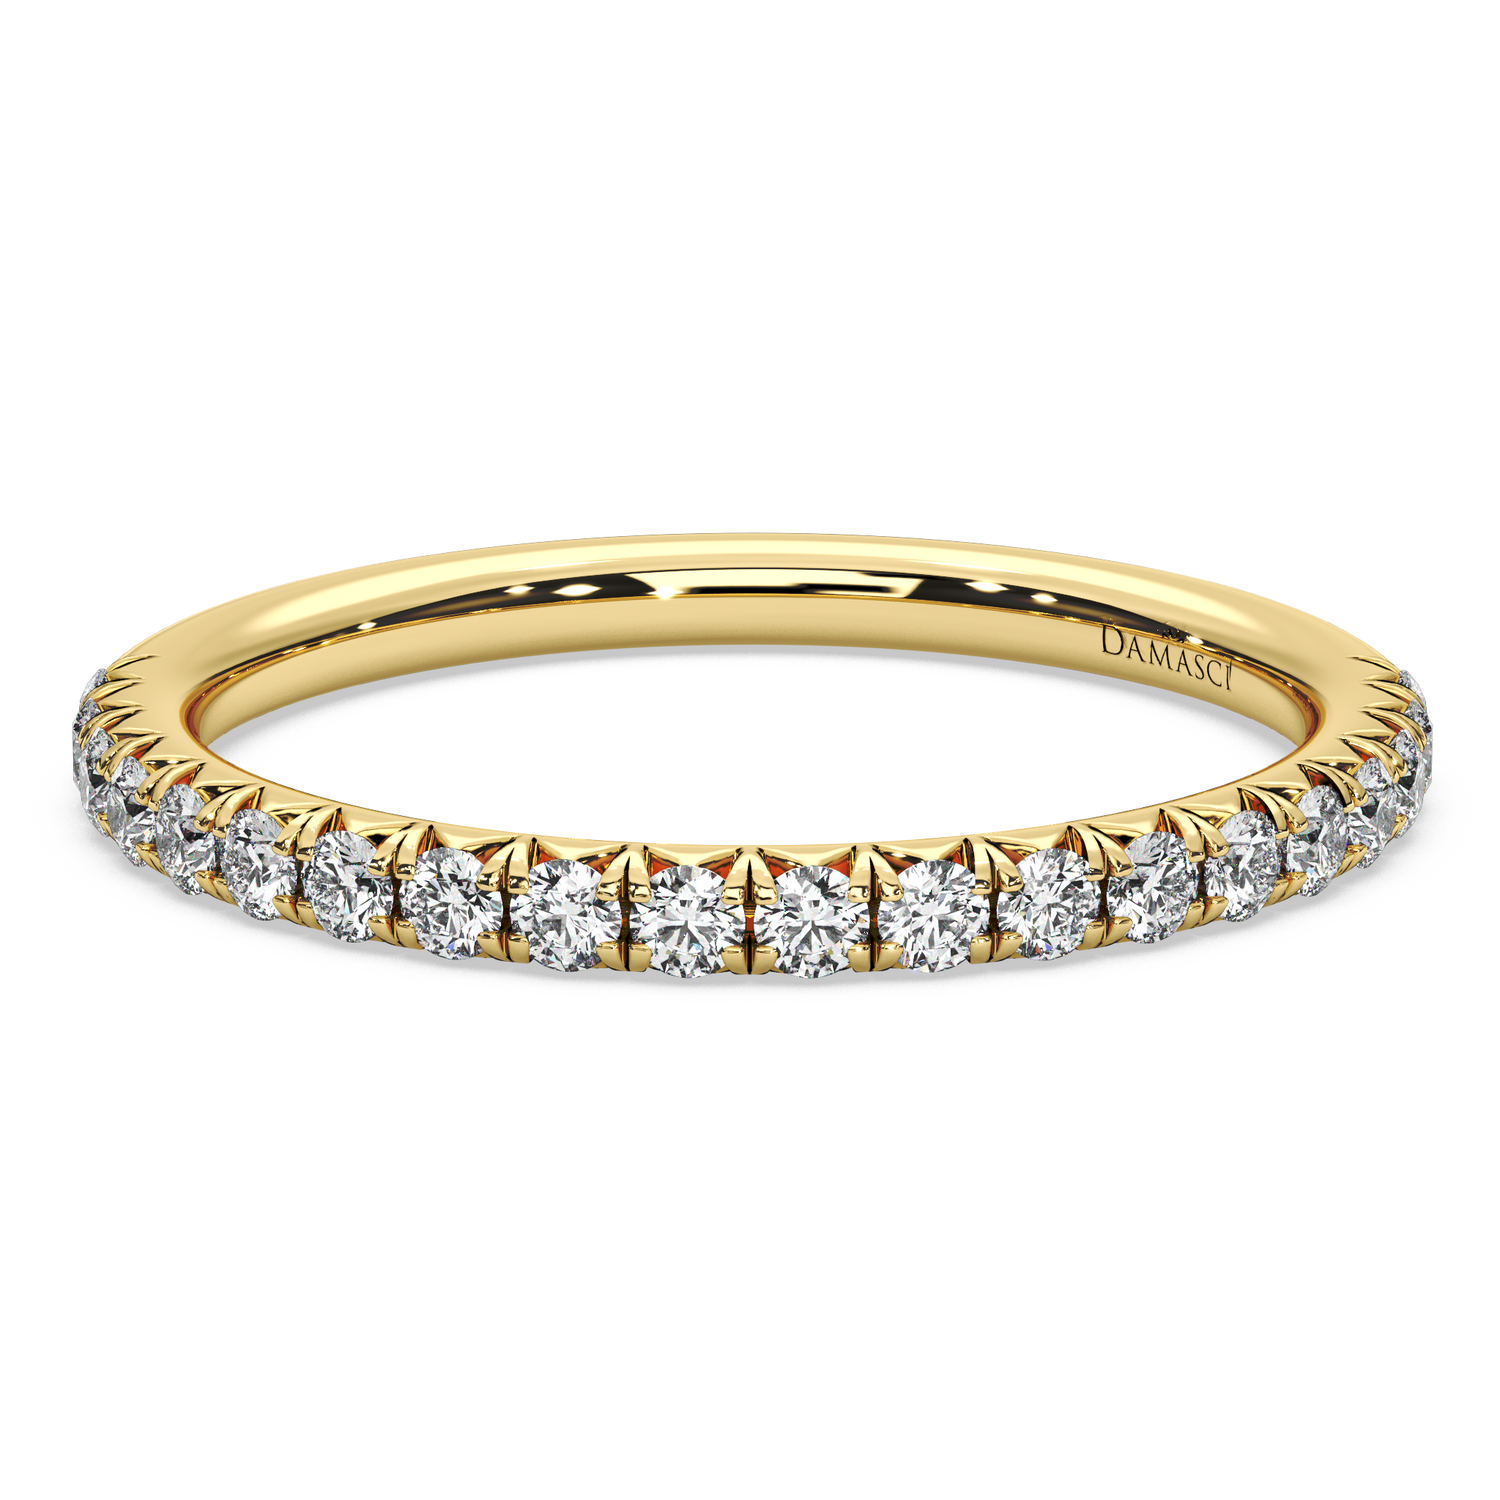 Round Brillliants in Our Graponia Gallery Wedding Ring